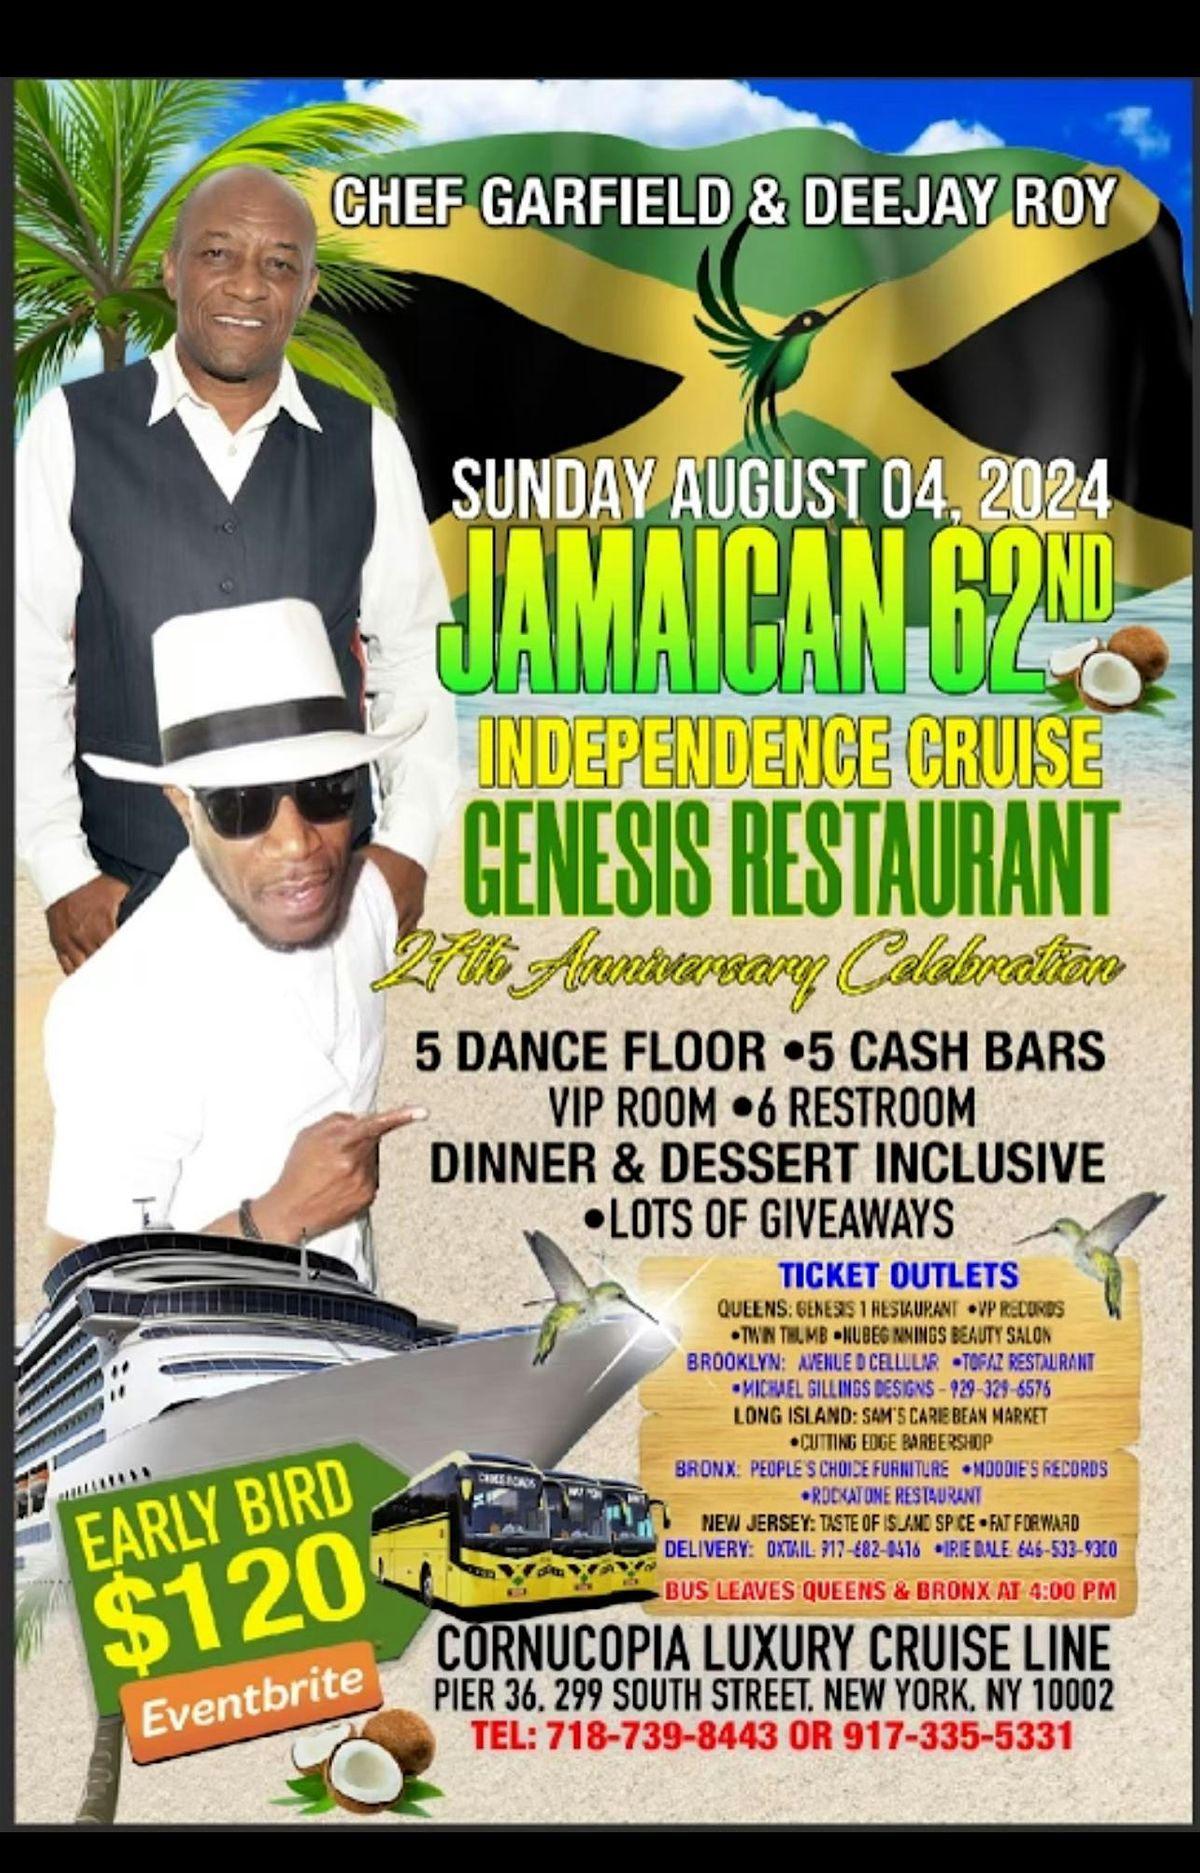 Chef Garfield & DeeJay Roy presents Jamaica 62nd Independence Cruise & Genesis 27th Anniversary